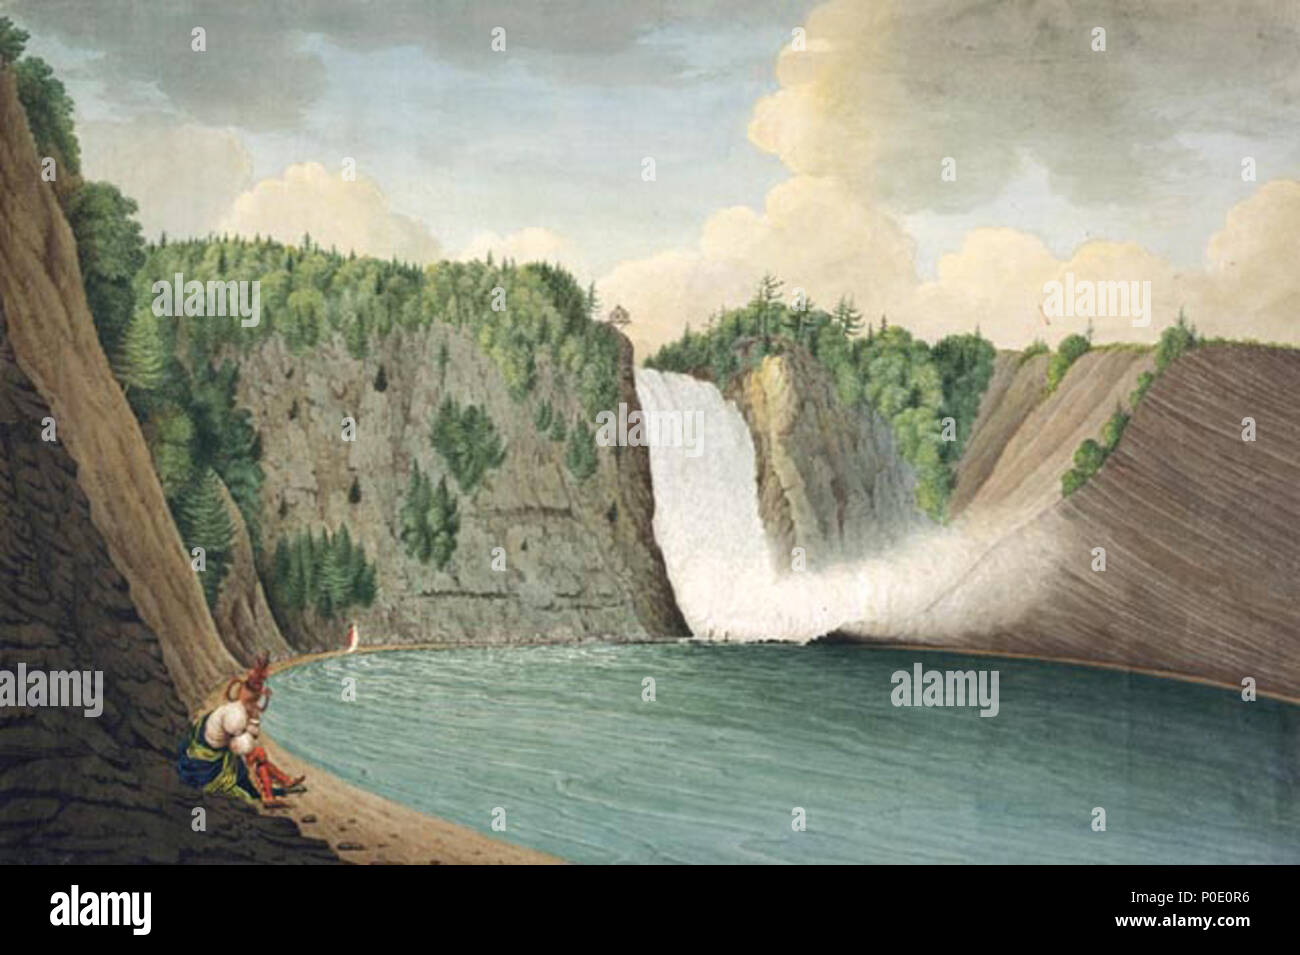 . A View of the Montmorency Falls near Quebec . 1790/1791.    Thomas Davies  (1737–1812)     Alternative names Thos. Davies  Description English soldier, artist and naturalist  Date of birth/death circa 1737 16 March 1812  Location of birth/death Shooter's Hill Blackheath  Authority control  : Q15520500 VIAF:?22993653 ISNI:?0000 0000 8206 3347 ULAN:?500124785 LCCN:?n50035469 NLA:?40002003 WorldCat 243 A View of the Montmorency Falls near Quebec - Thomas Davies Stock Photo